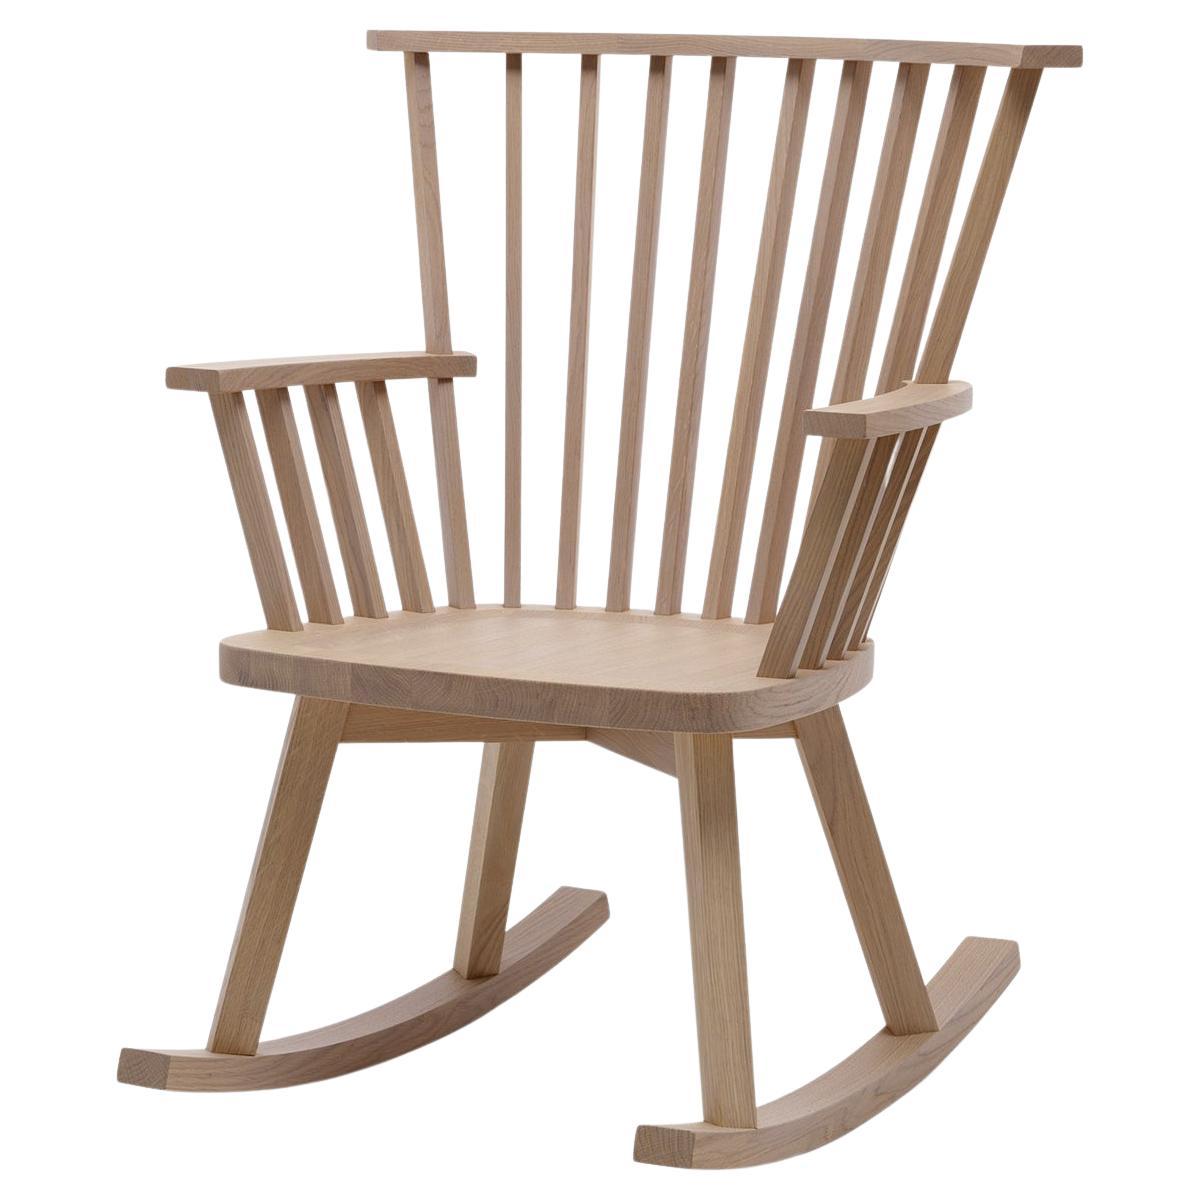 Oaky Rocking Chair For Sale